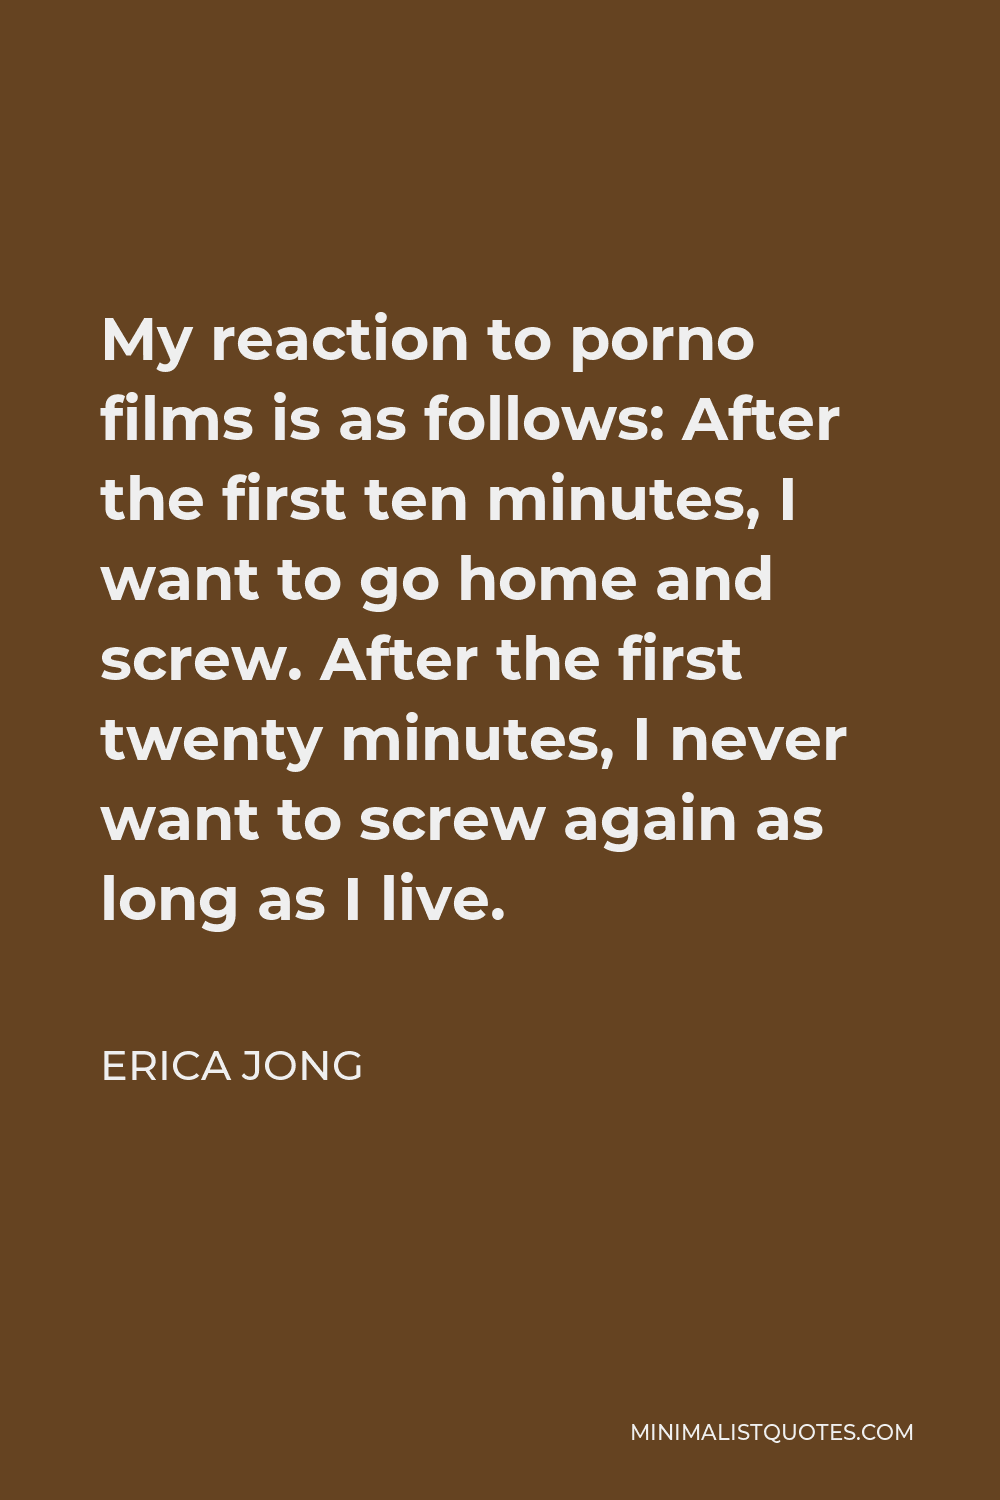 Erica Jong Quote - My reaction to porno films is as follows: After the first ten minutes, I want to go home and screw. After the first twenty minutes, I never want to screw again as long as I live.